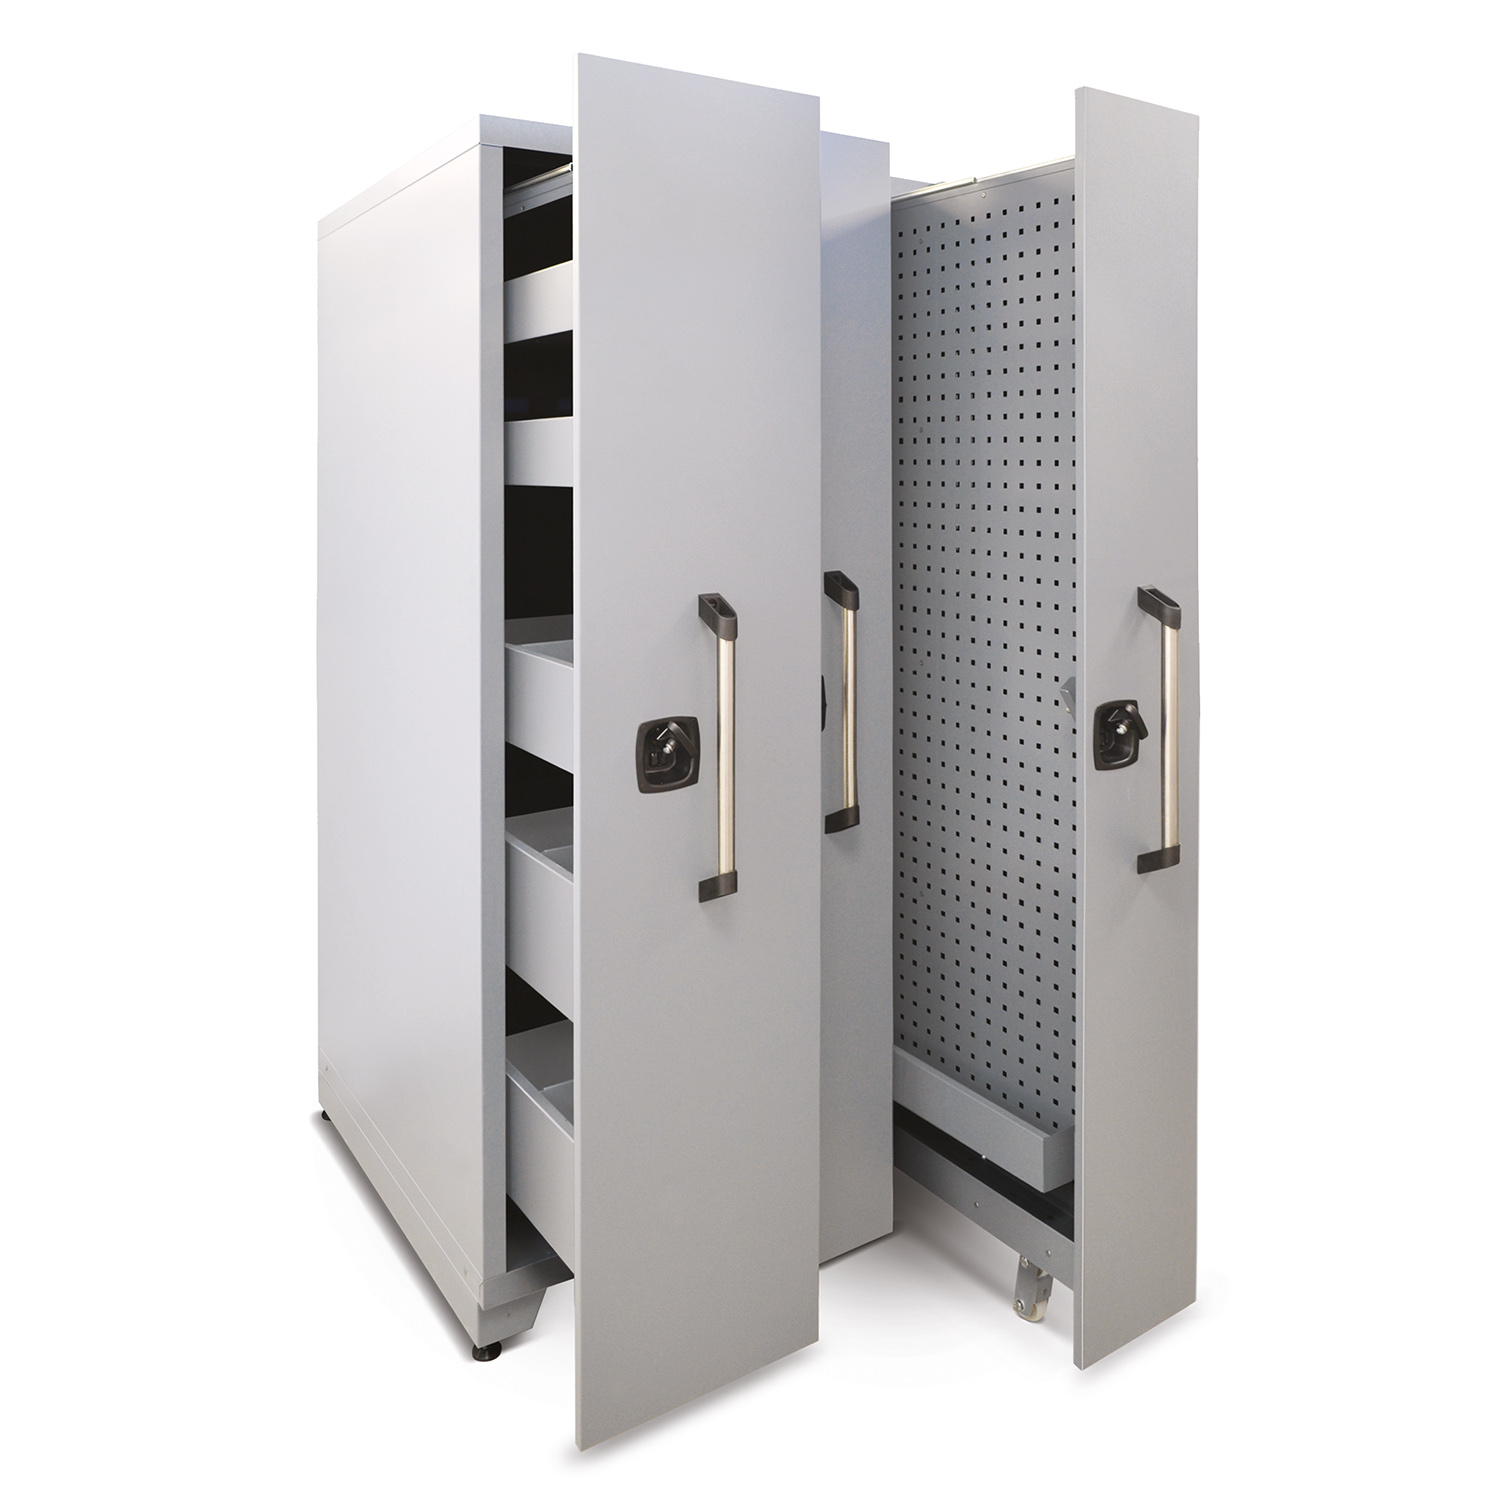 Vertical Special Service Tool Cabinets (1m deep)